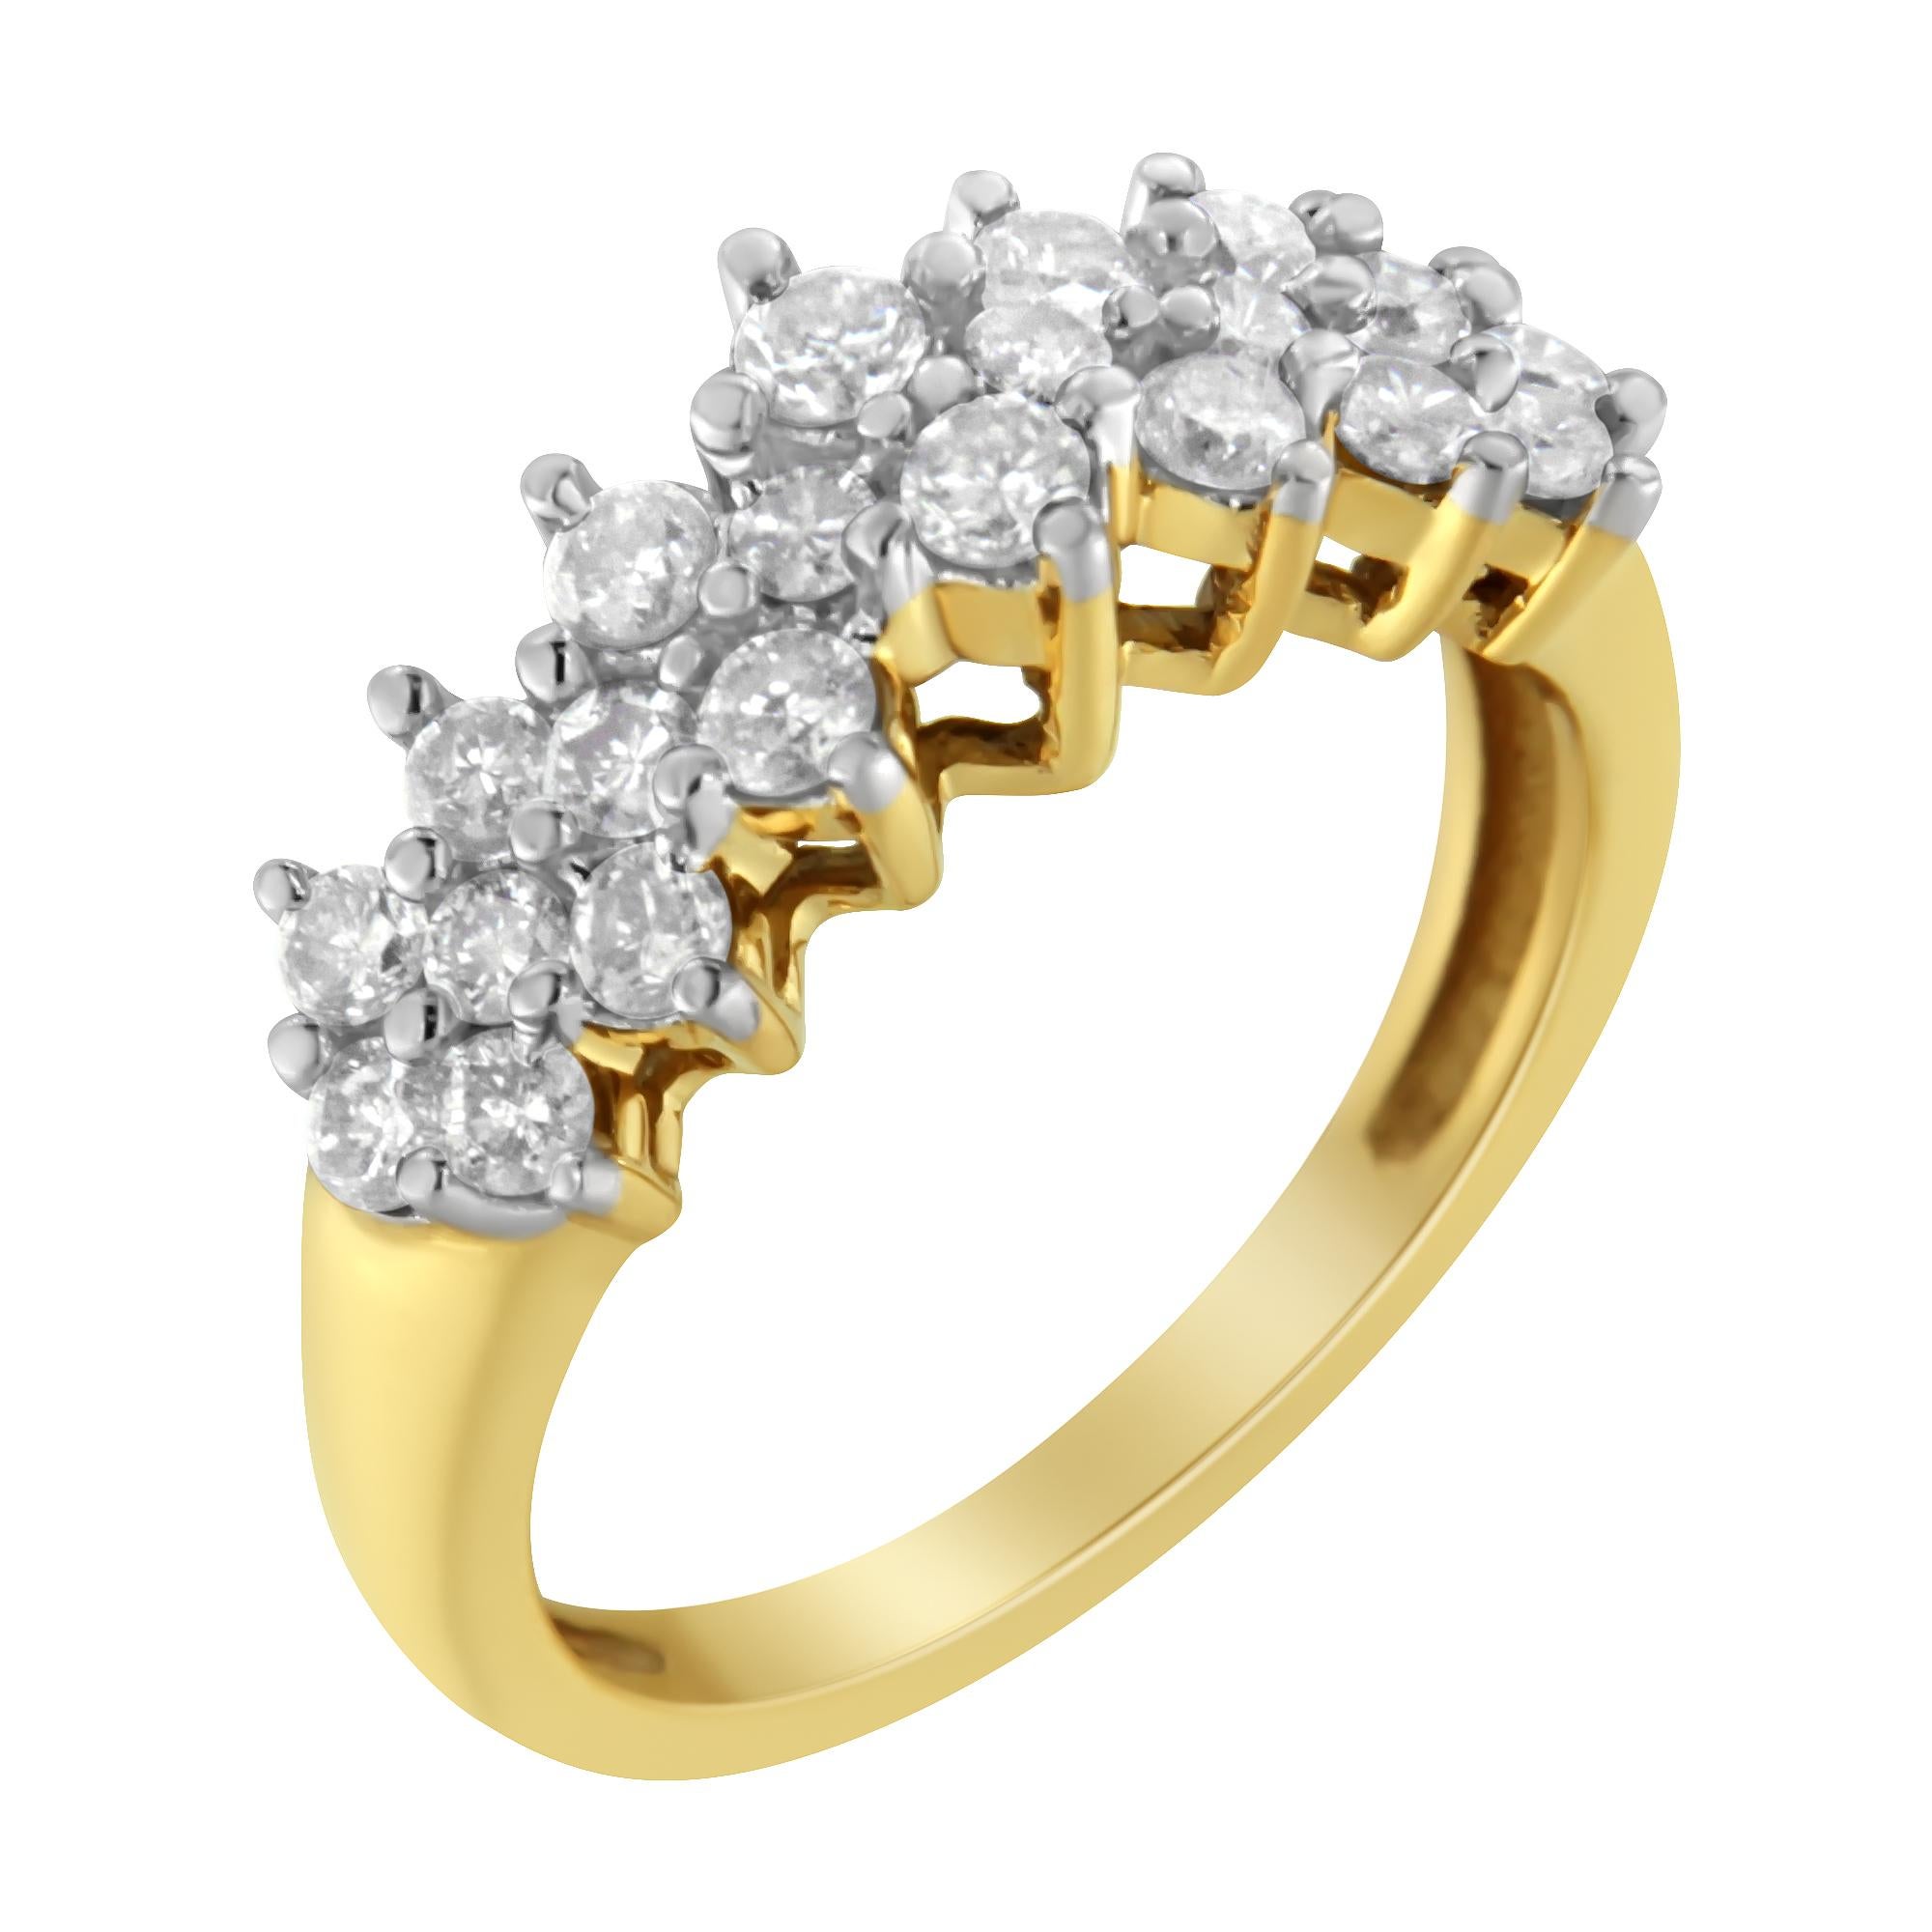 10K Yellow Gold Round 1.0 cttw Diamond Ring (J-K Color, I1-I2 Clarity) For Sale